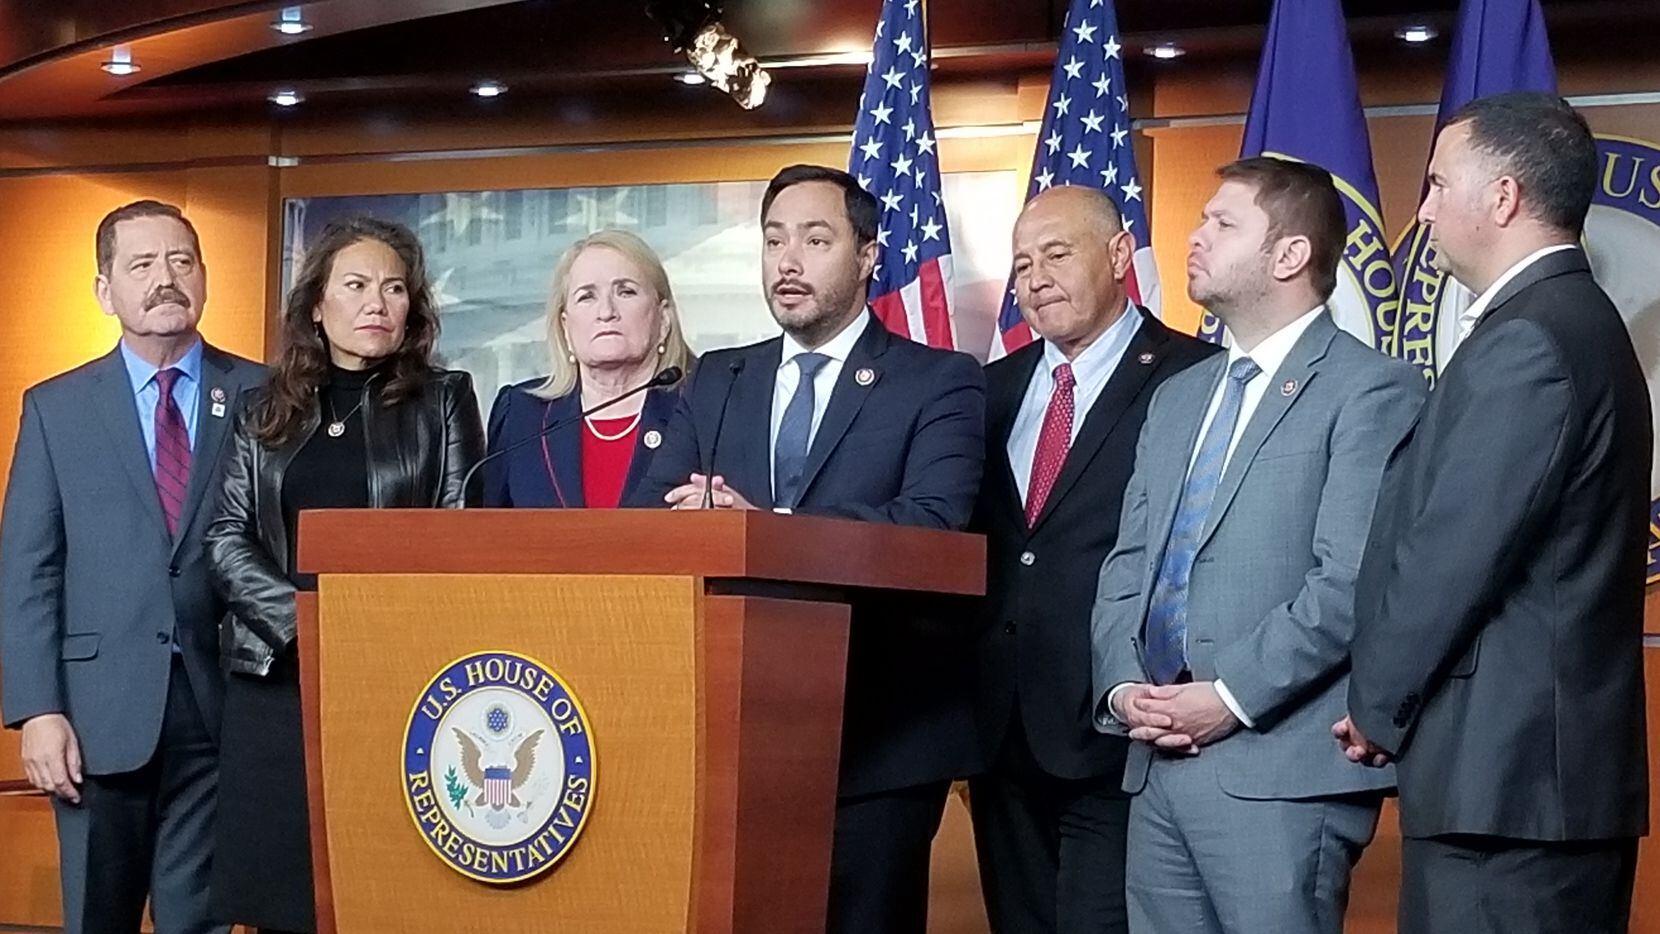 Rep. Joaquin Castro, D-San Antonio, and chairman of the Congressional Hispanic Caucus, leads a news conference with caucus members on Nov. 12, 2019, after the Supreme Court heard arguments on President Donald Trump's decision to scrap the DACA program, which protected young people brought into the United States illegally from deportation.